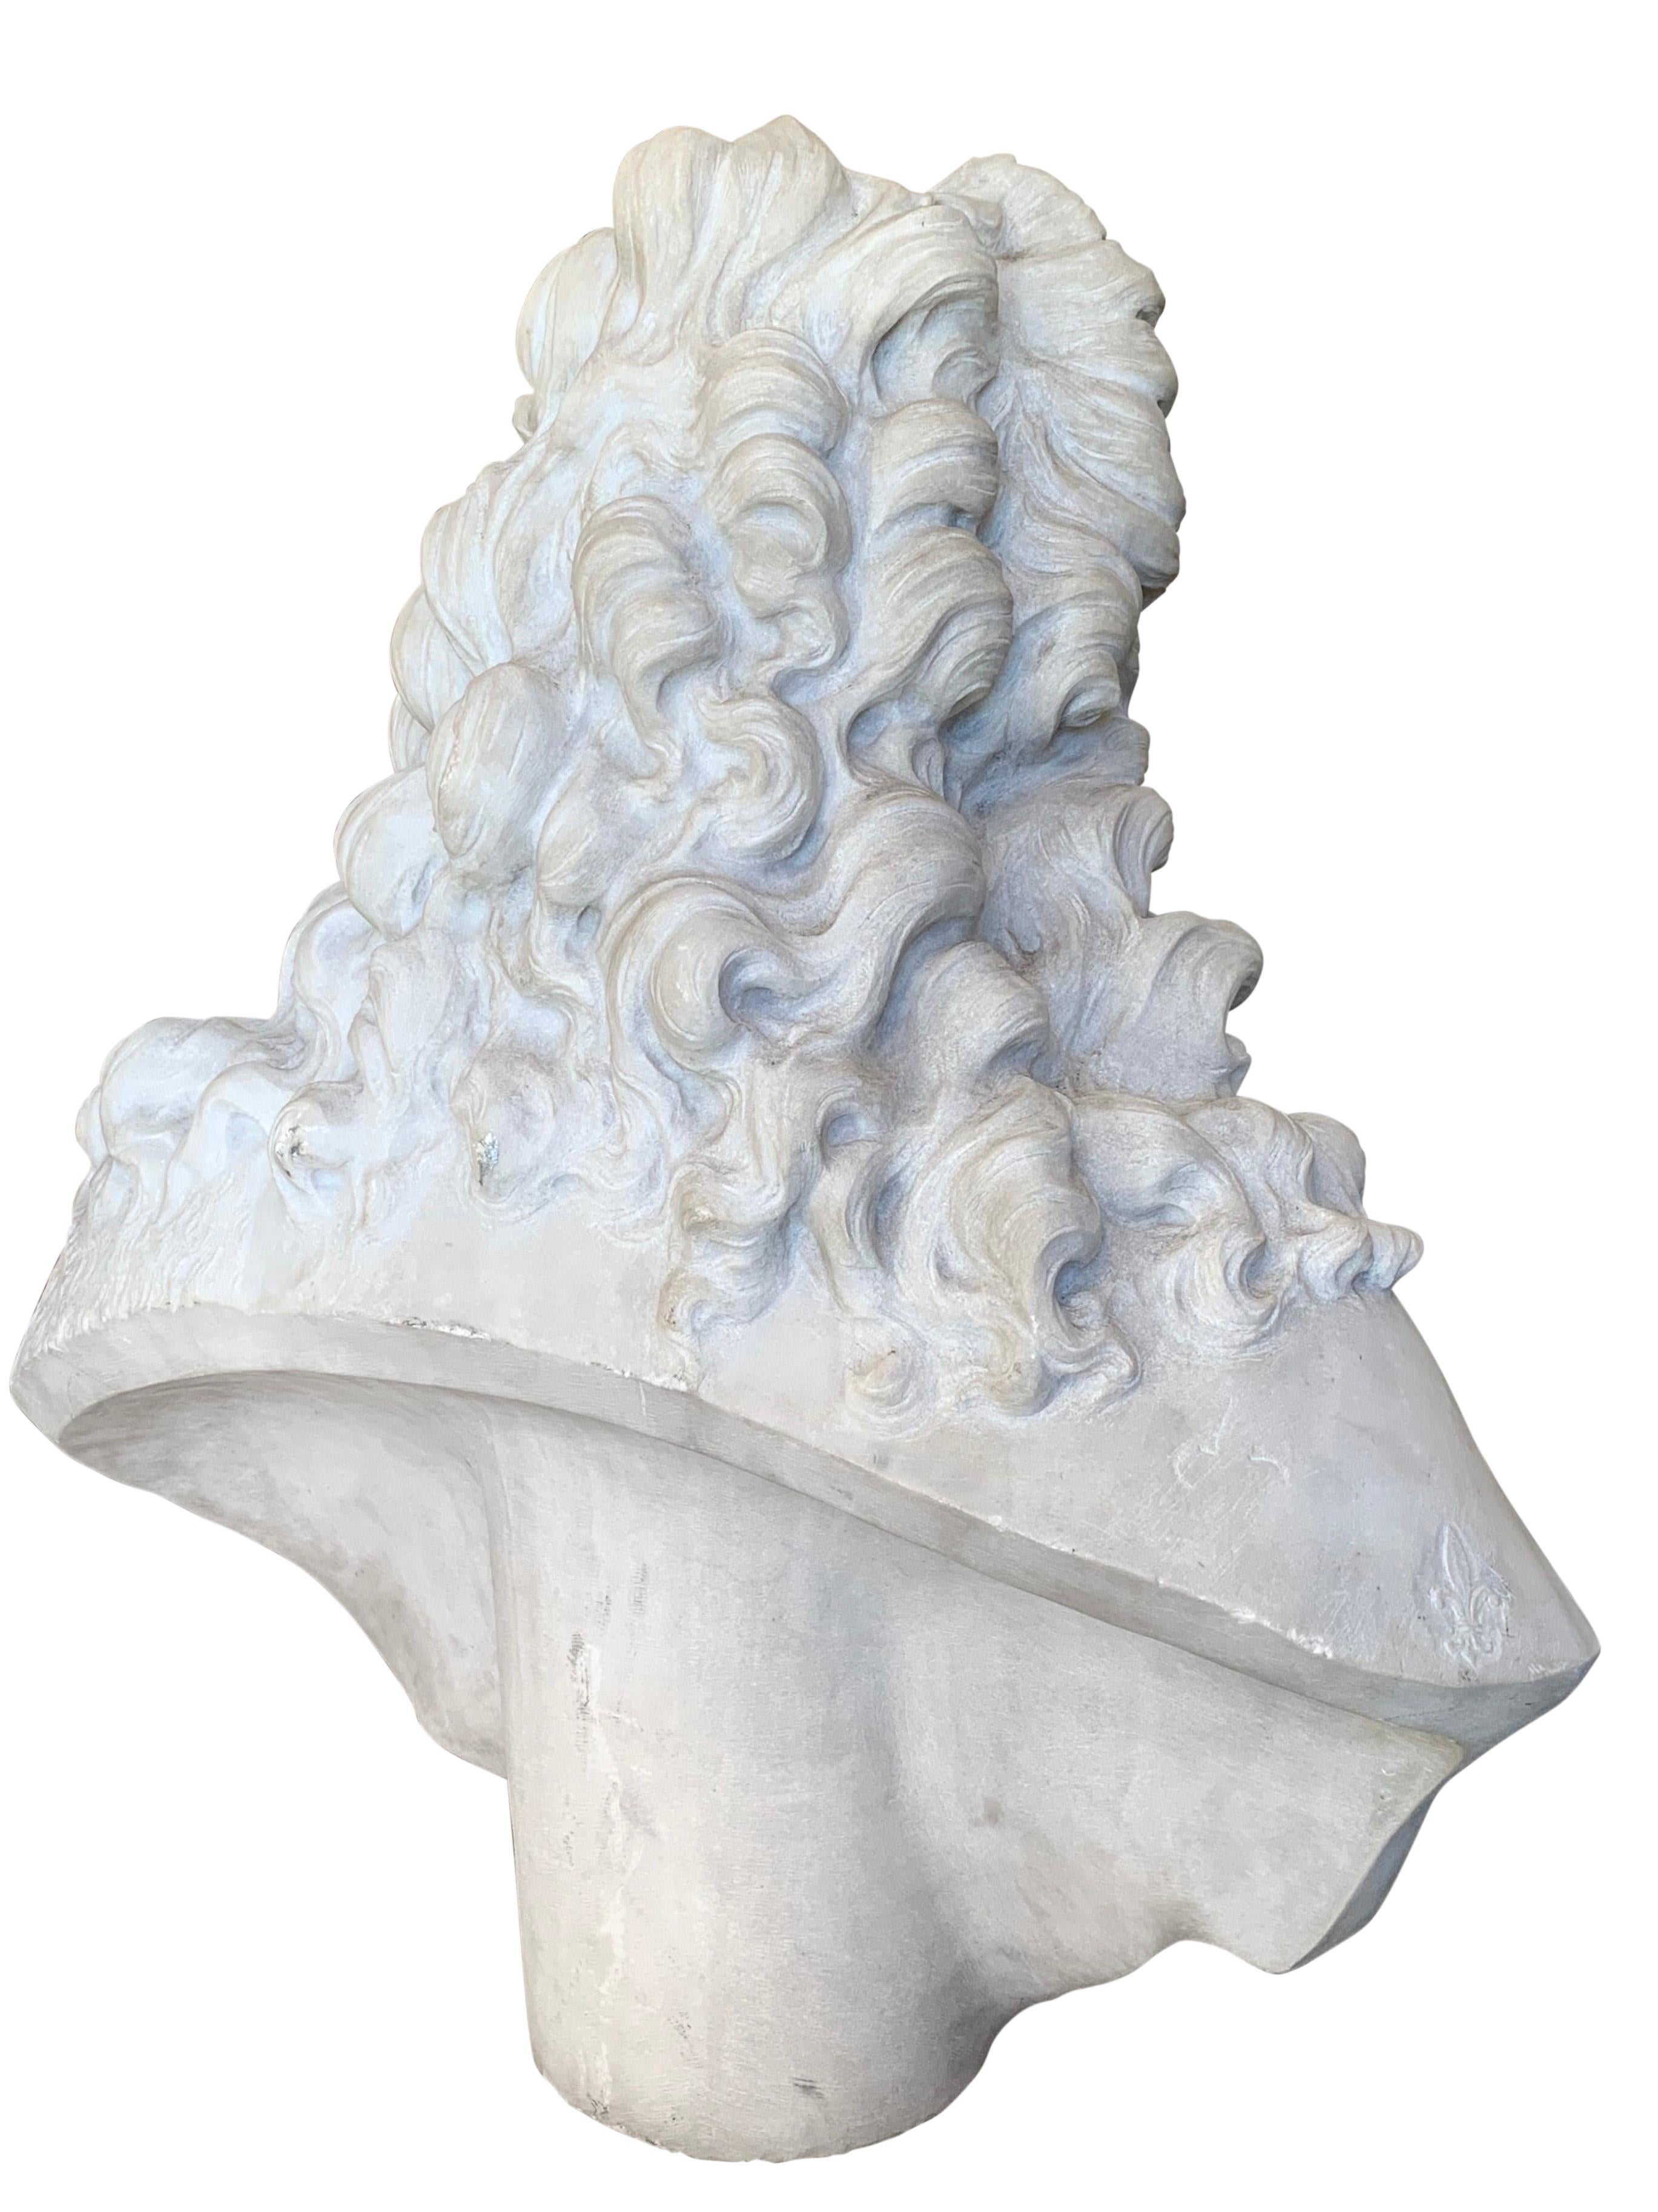 19th Century A French Antique Carved White Marble Bust of Louis XIV 'The Sun King' Circa 1890 For Sale